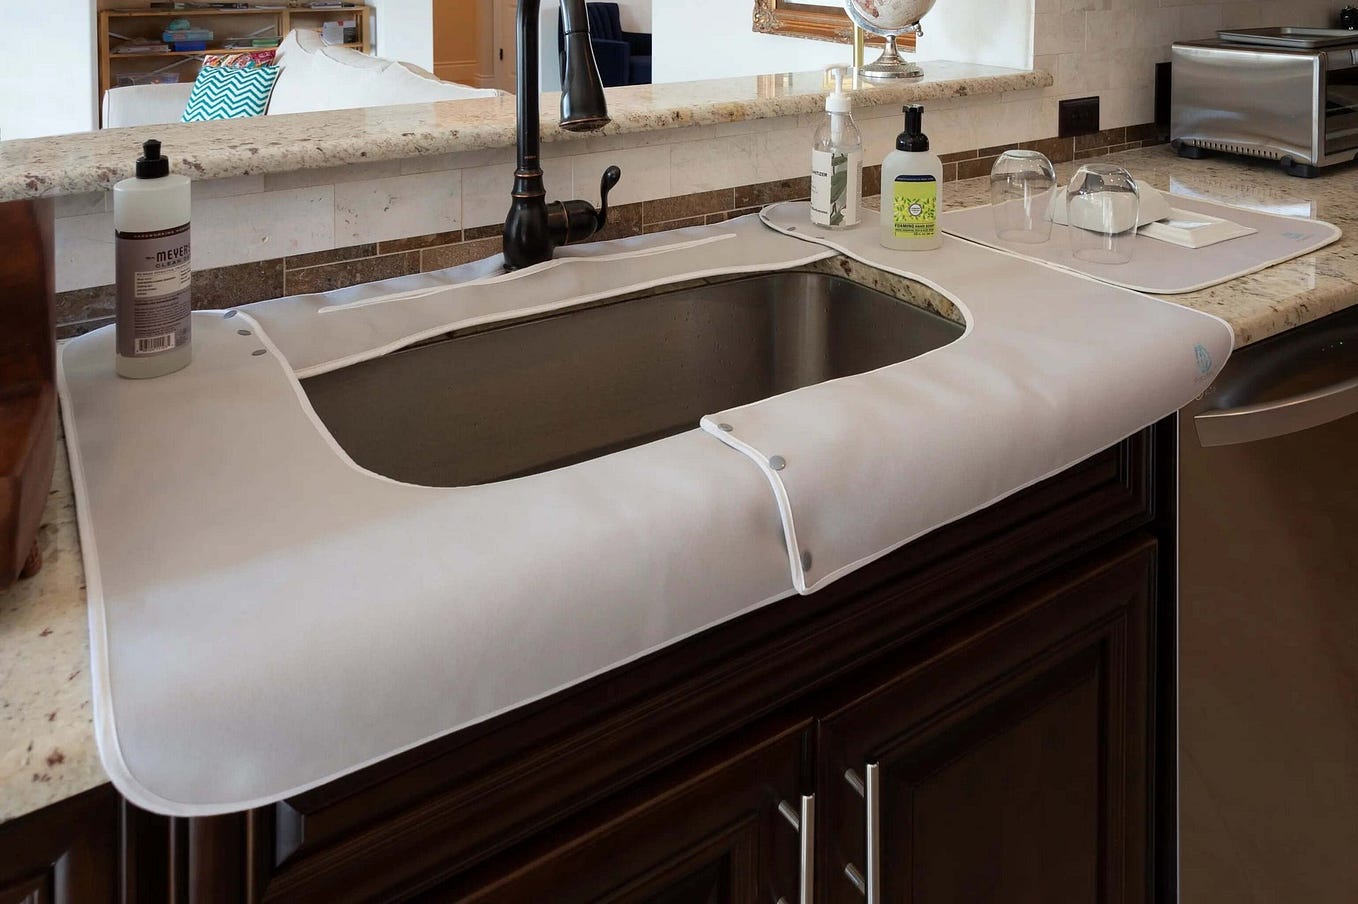 Countertop Protector Mat. Enhance Your Sink Area with a… | by Microfiber  Sink Splash Guard Mat | Sink Cover | Medium